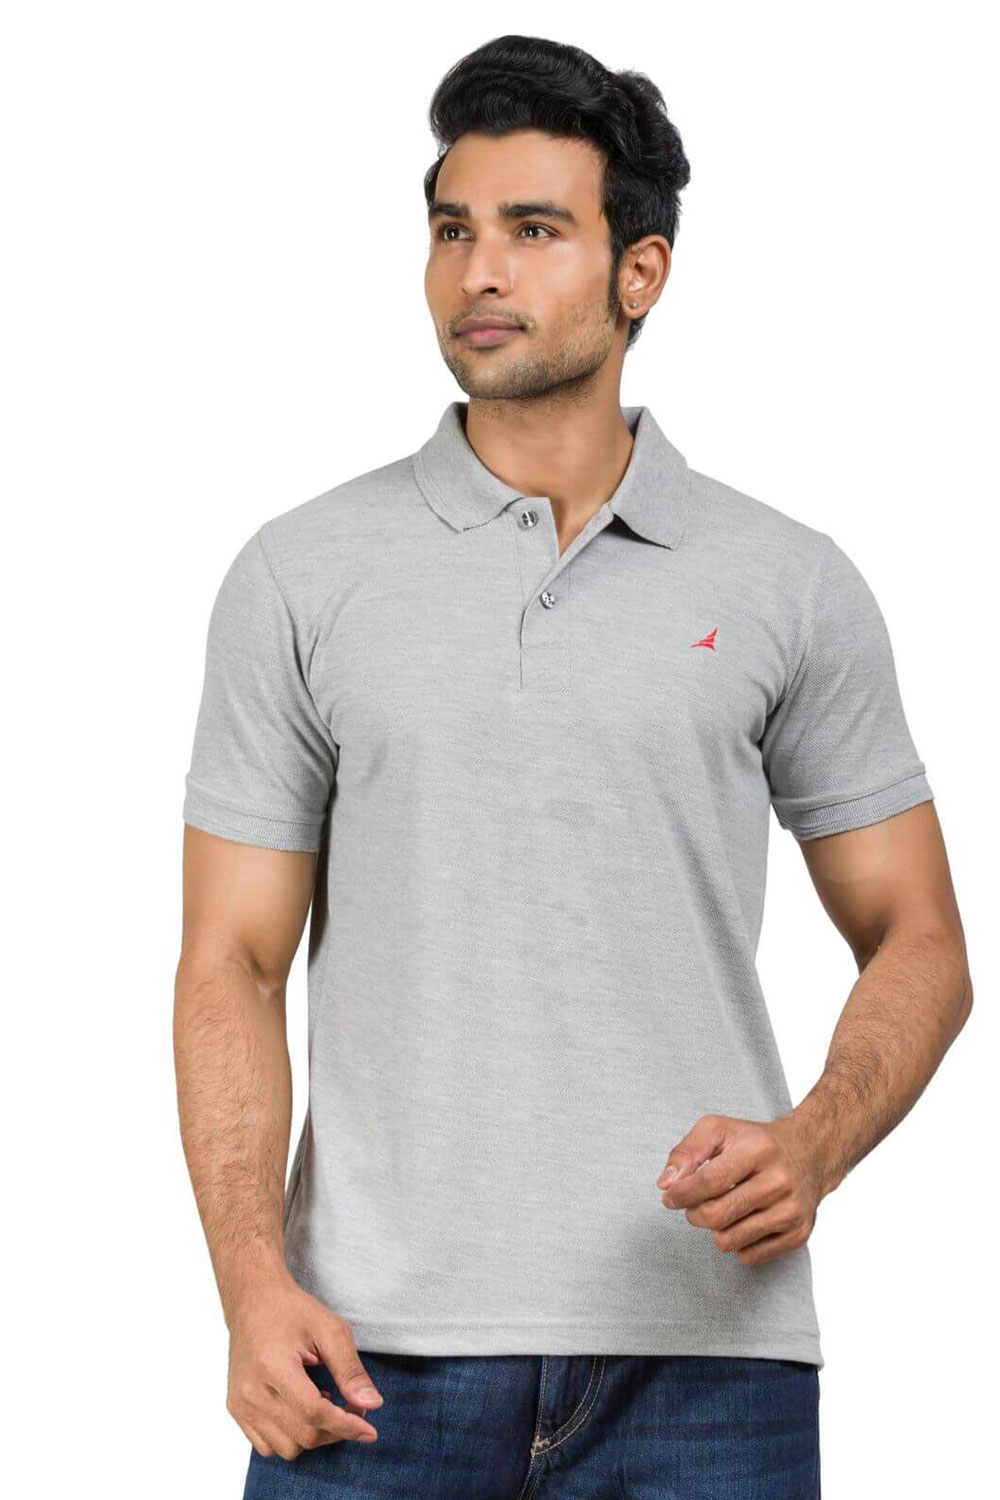 Cotton Blend Solid Grey Polo T-shirt For Men